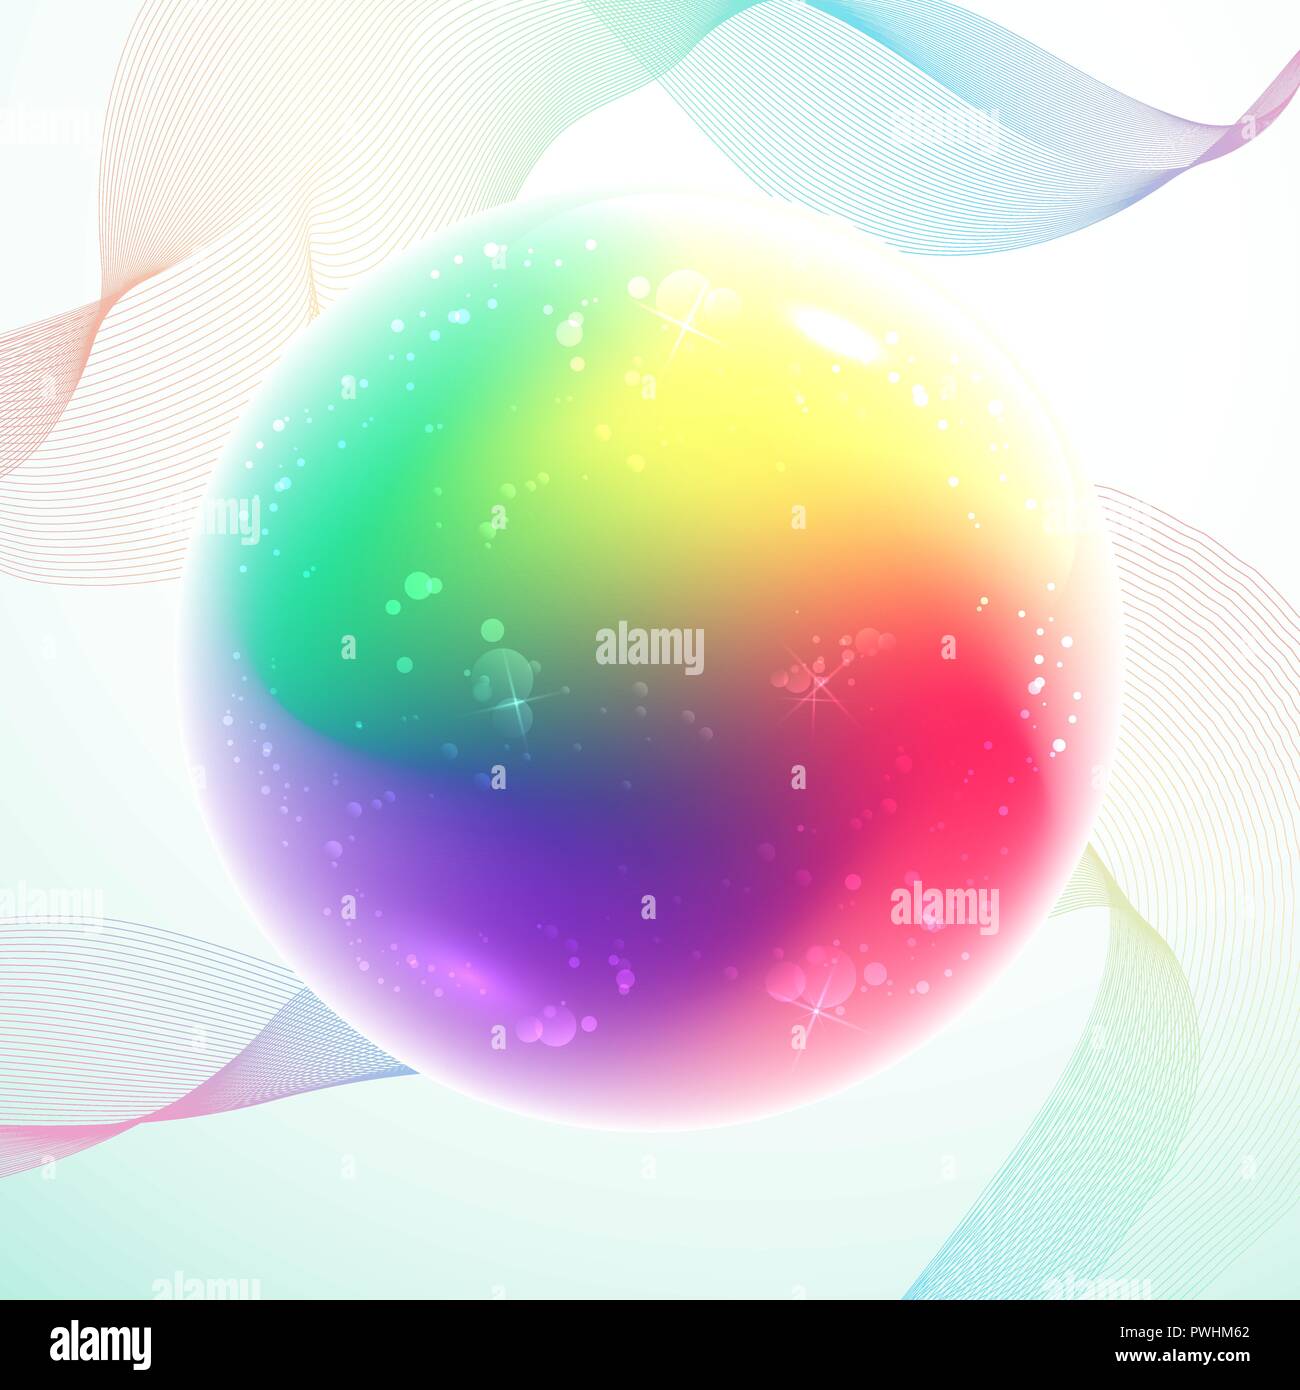 Rainbow magic ball with bubbles inside on abstract lines background Stock Vector